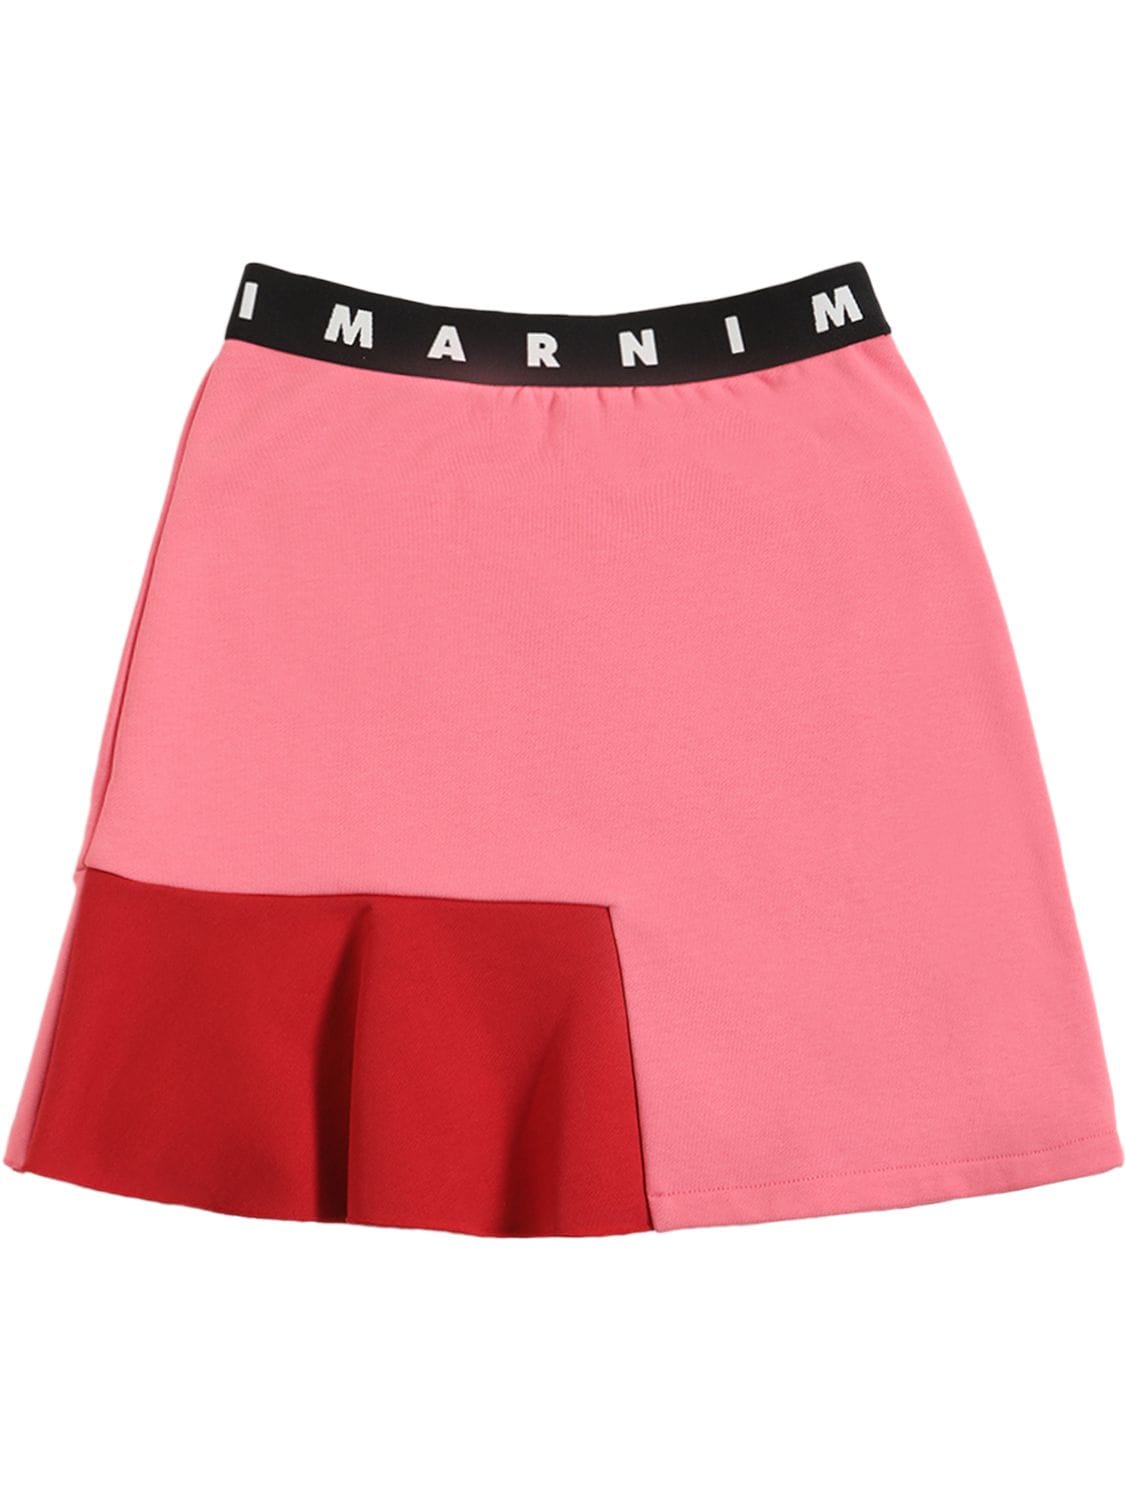 Marni Junior Kids' Color Block Cotton Skirt W/logo Tape In Pink,red